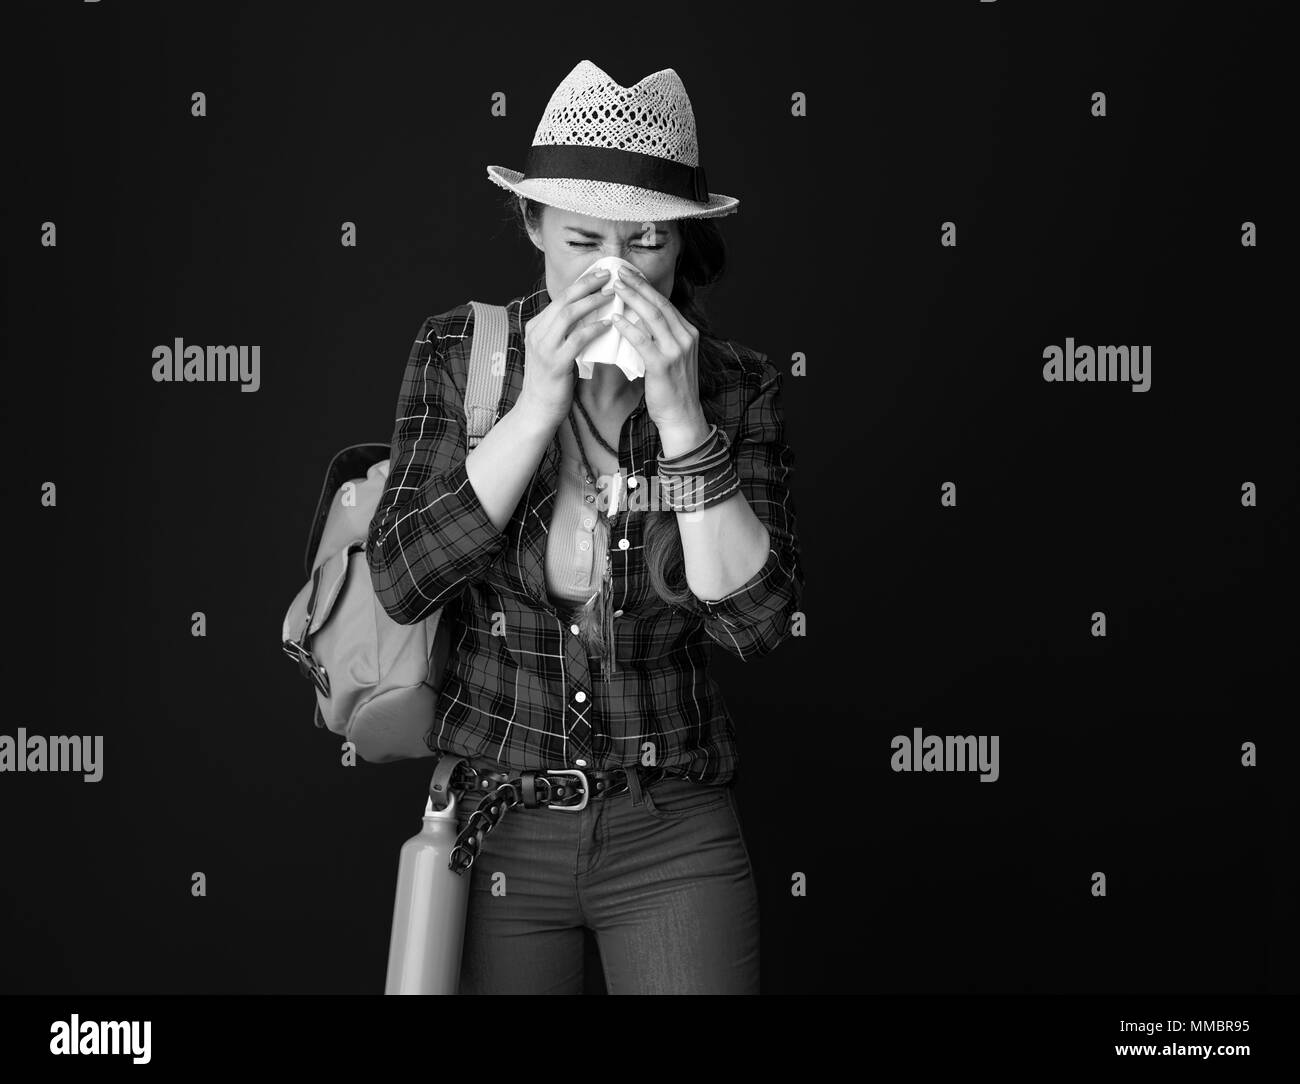 Searching for inspiring places. ill traveller woman in a plaid shirt blowing nose against background Stock Photo